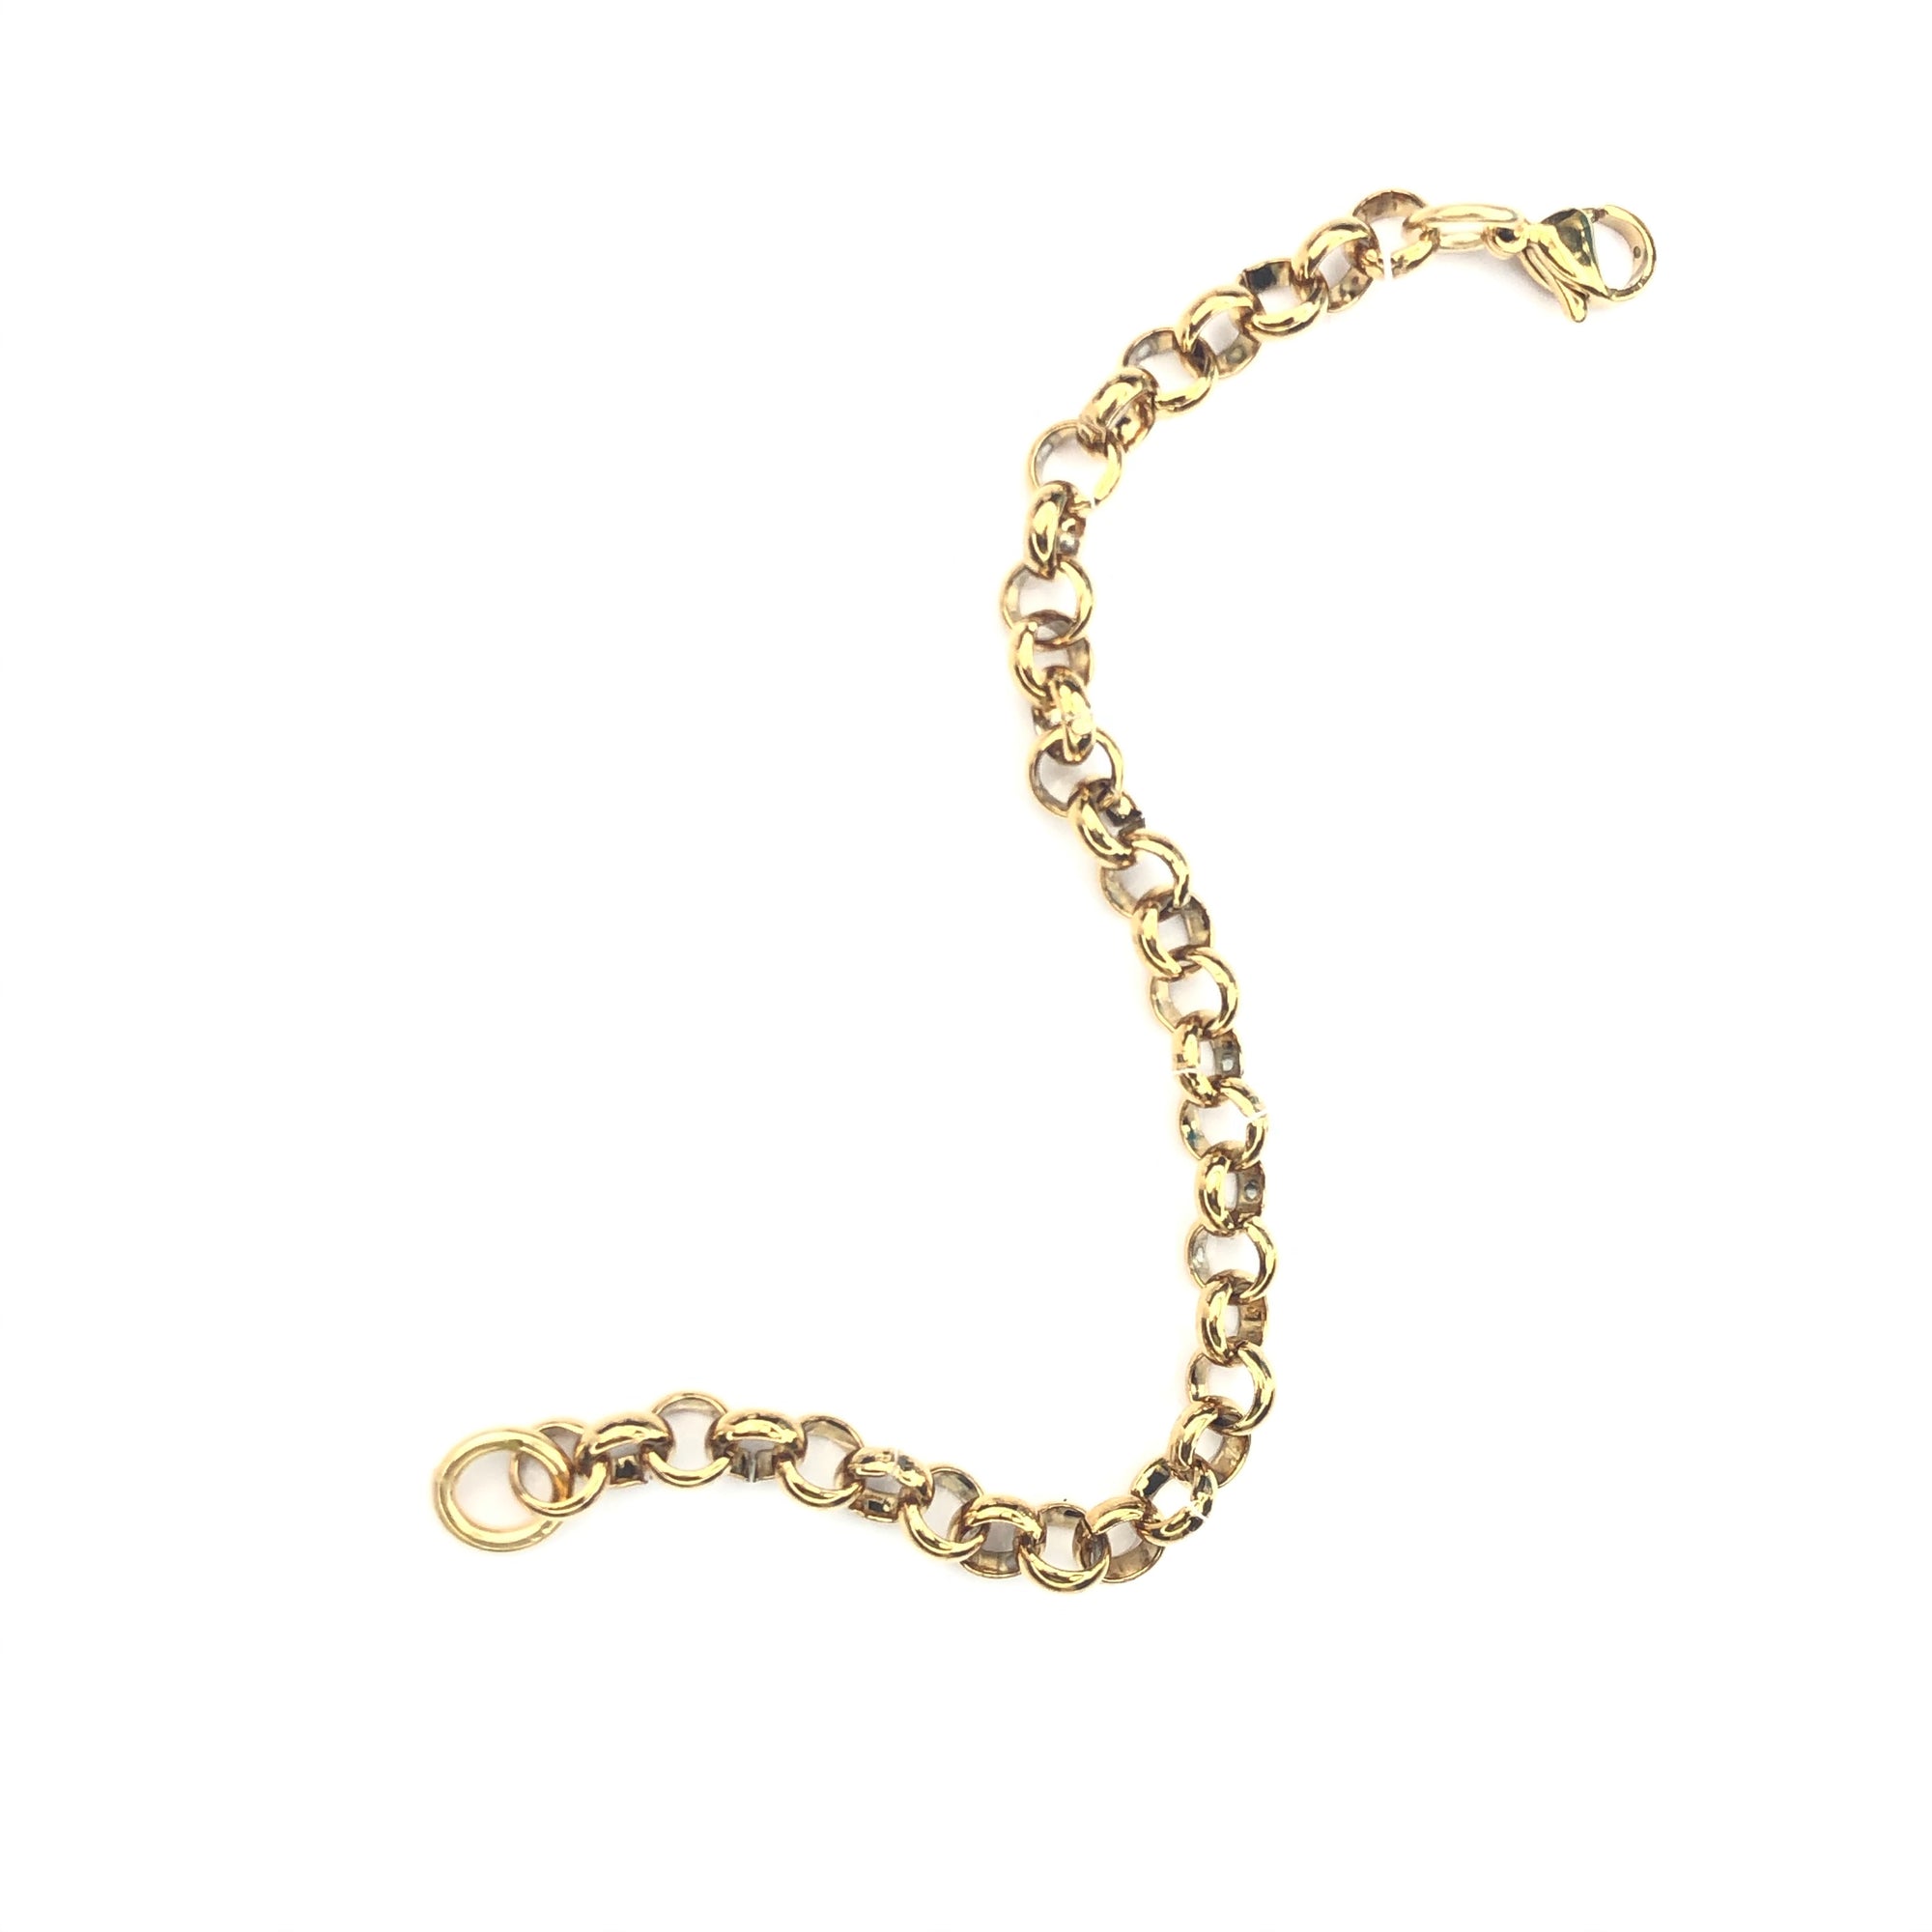 3 Way Extender Extension Chain Cerese D, Inc. Gold  